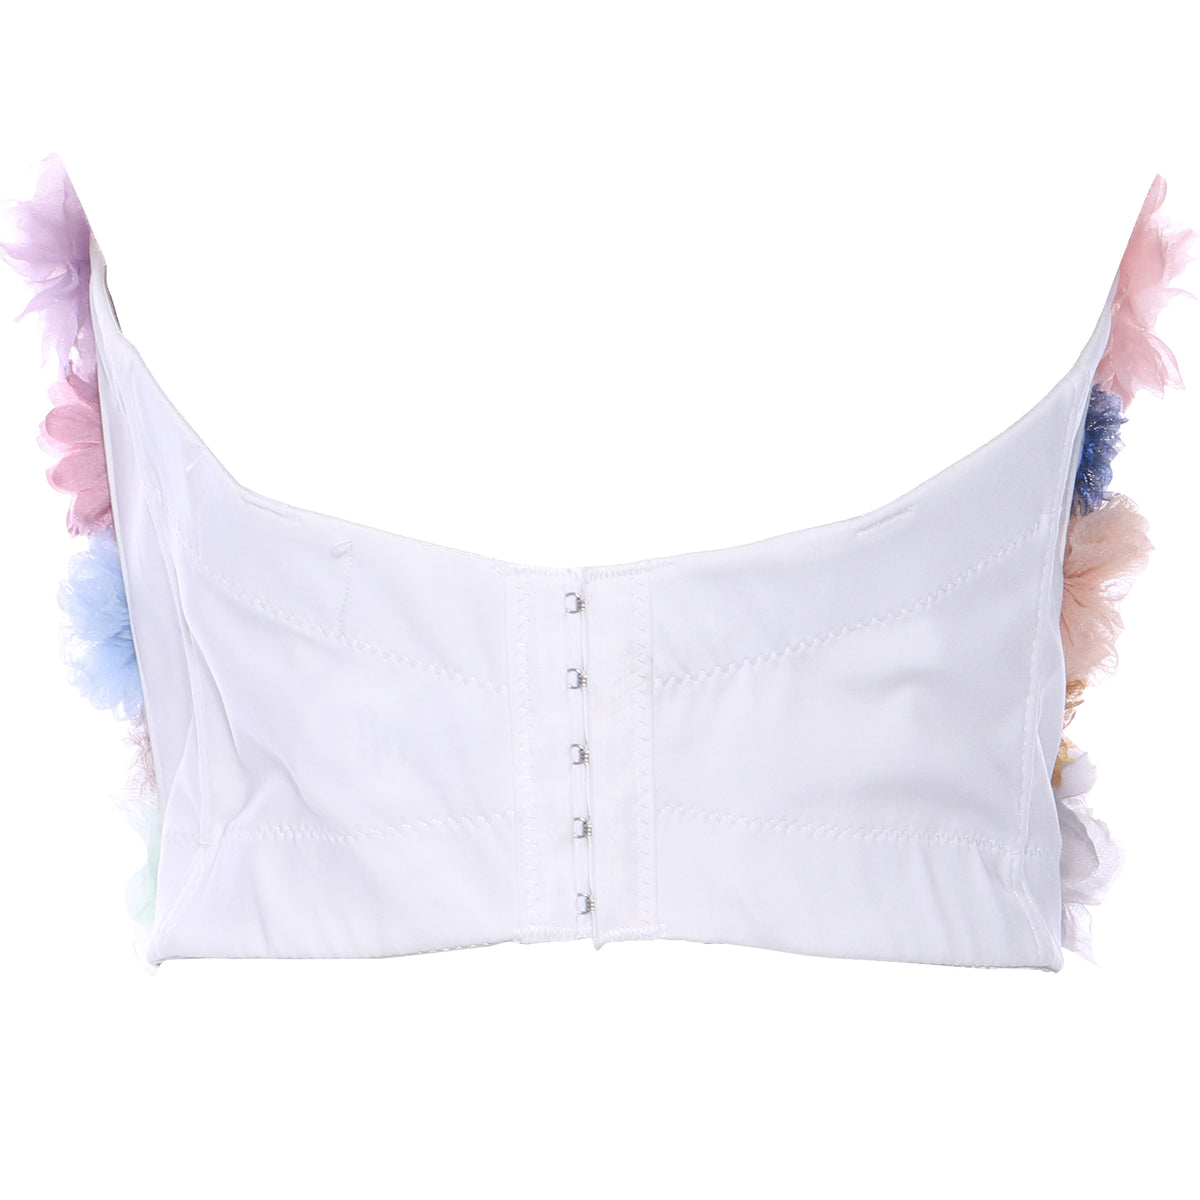 Dilone Feather Rossette Tulle Mesh Bustier Cami Crop Top - Ballet